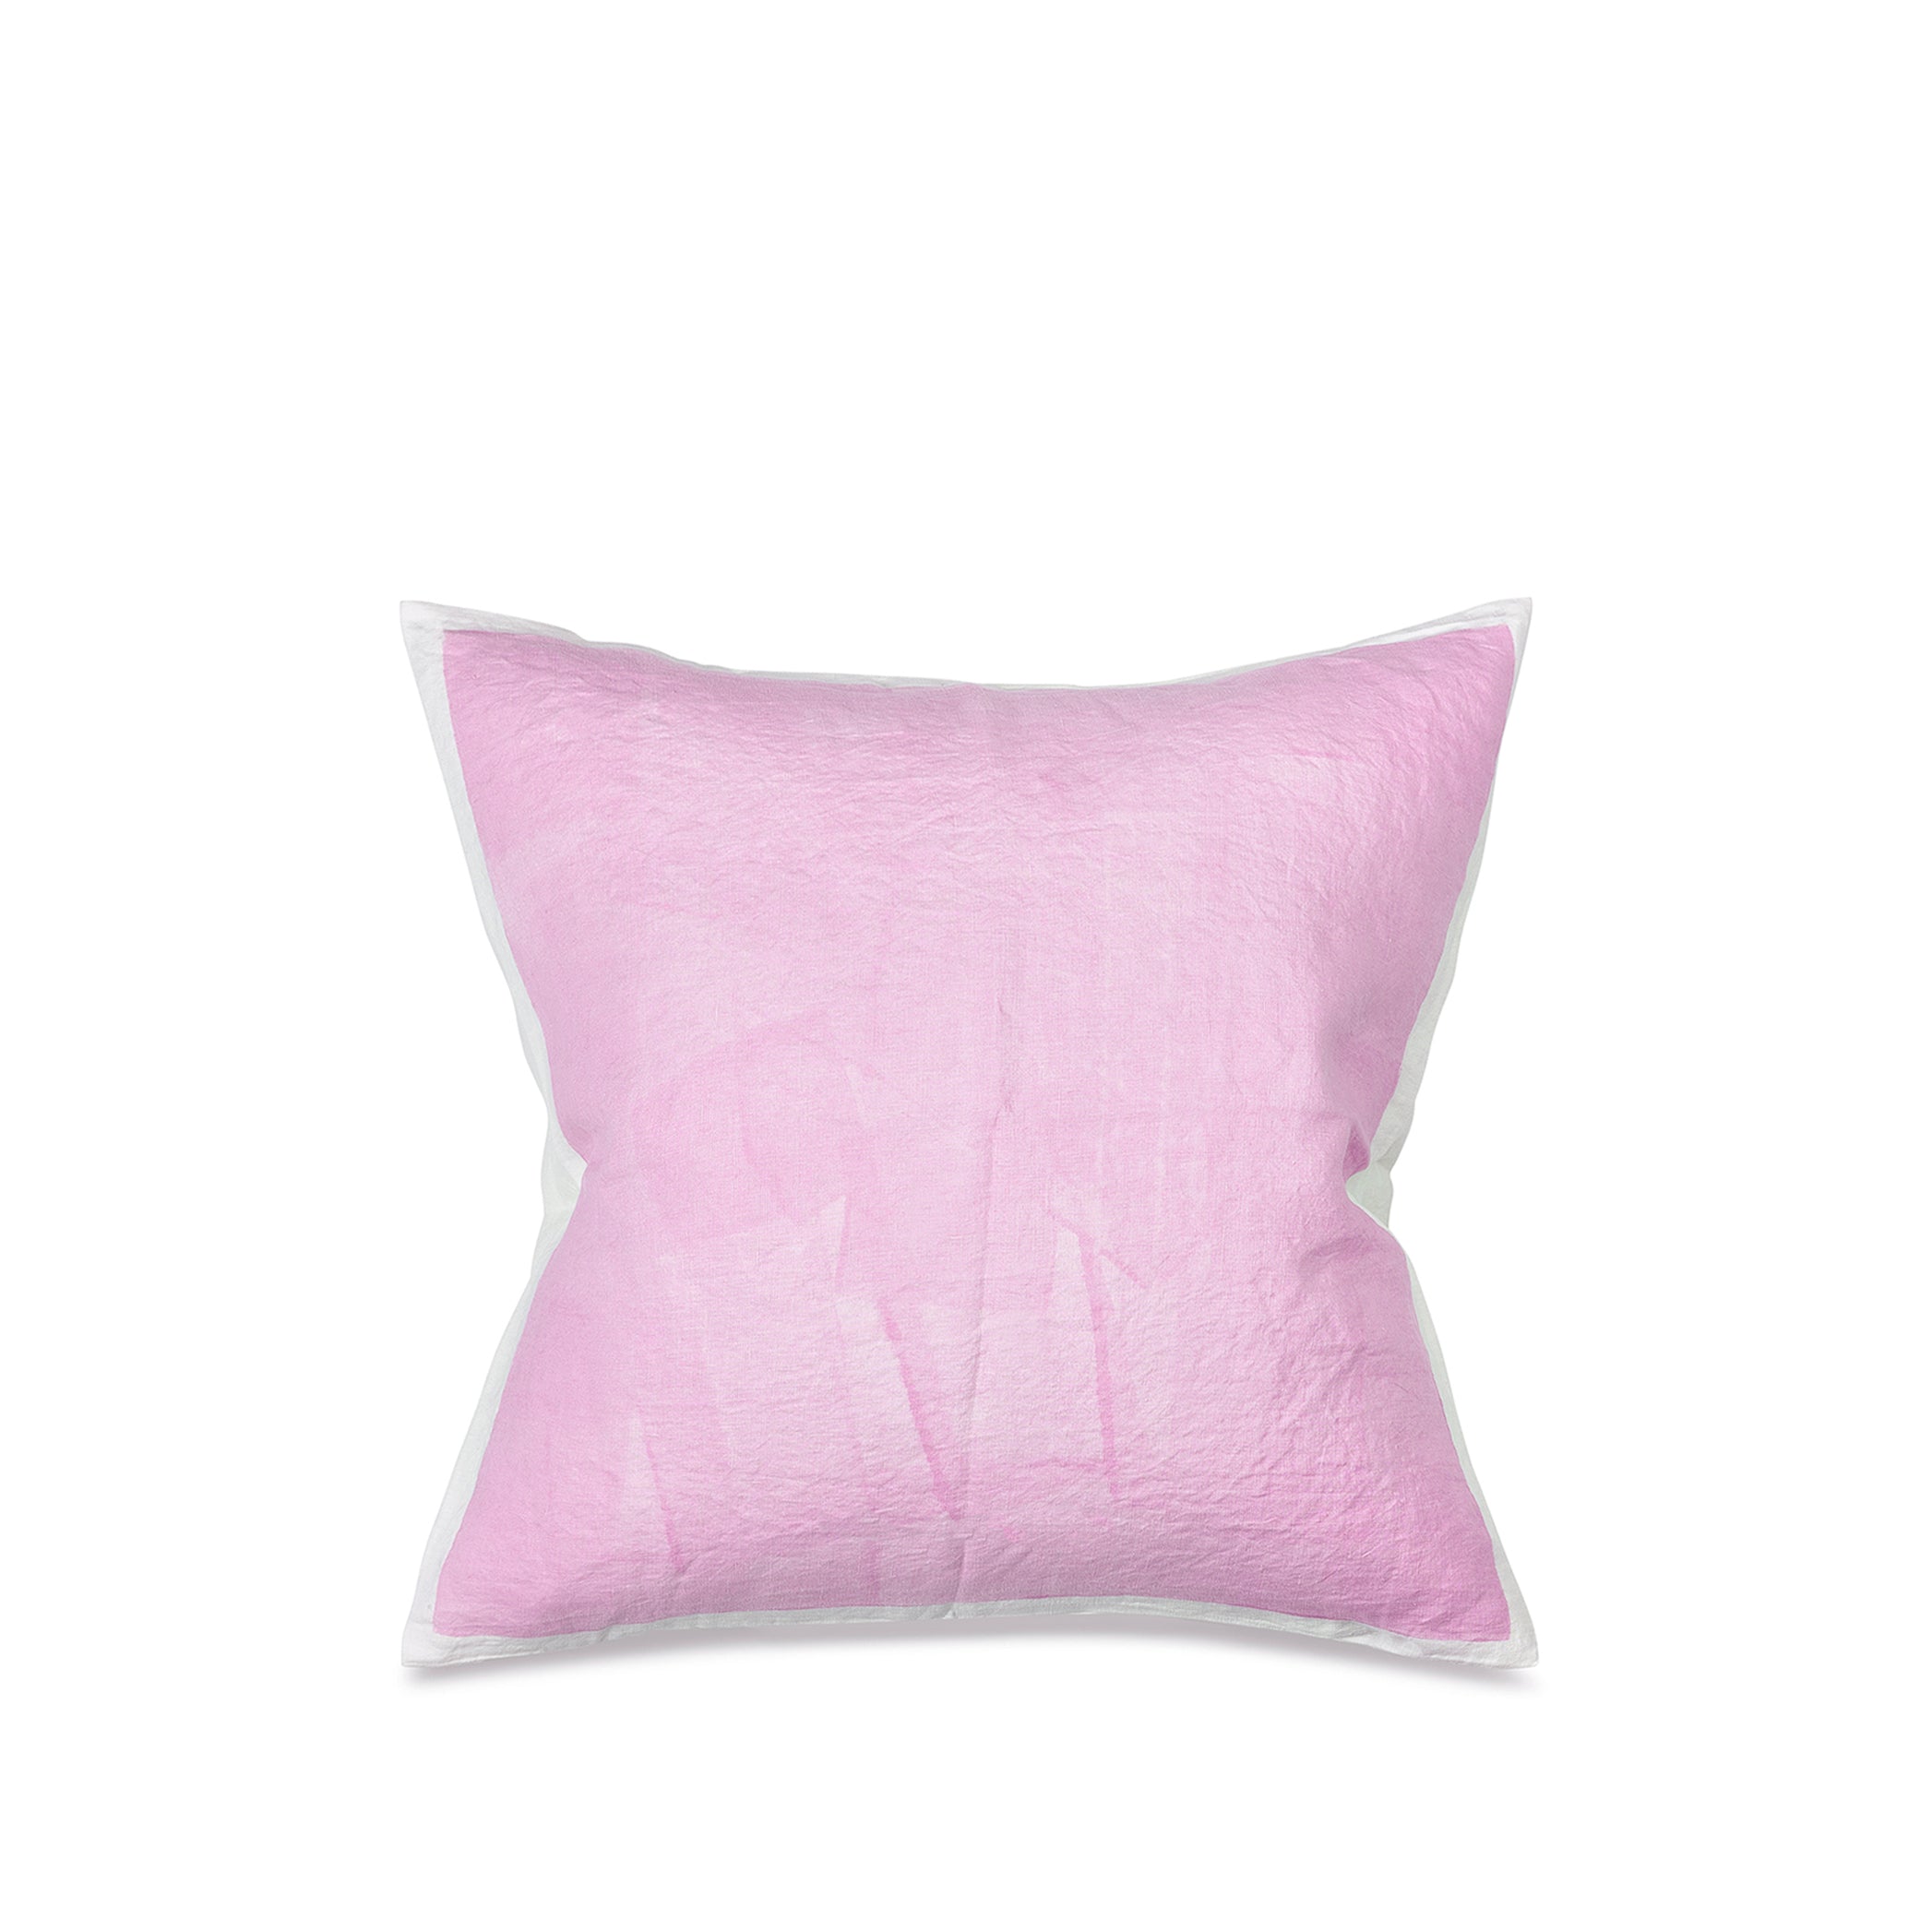 Hand Painted Linen Cushion in Pale Pink, 60cm x 60cm